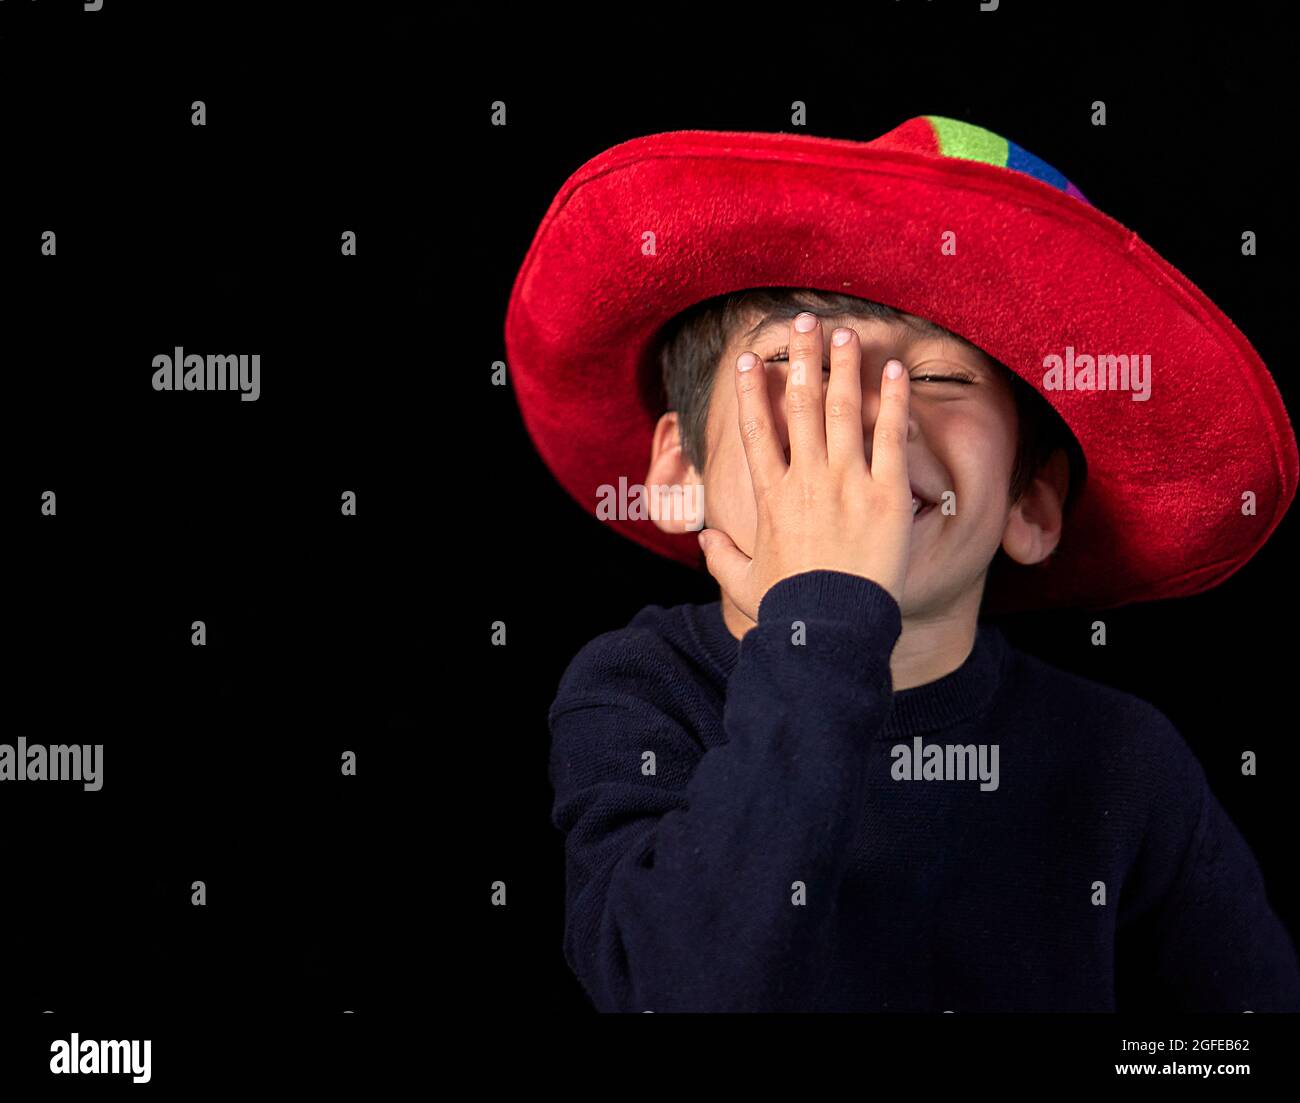 Latino little boy wearing a red hat smiling and covering his face with his hand. Copy space and black background Stock Photo